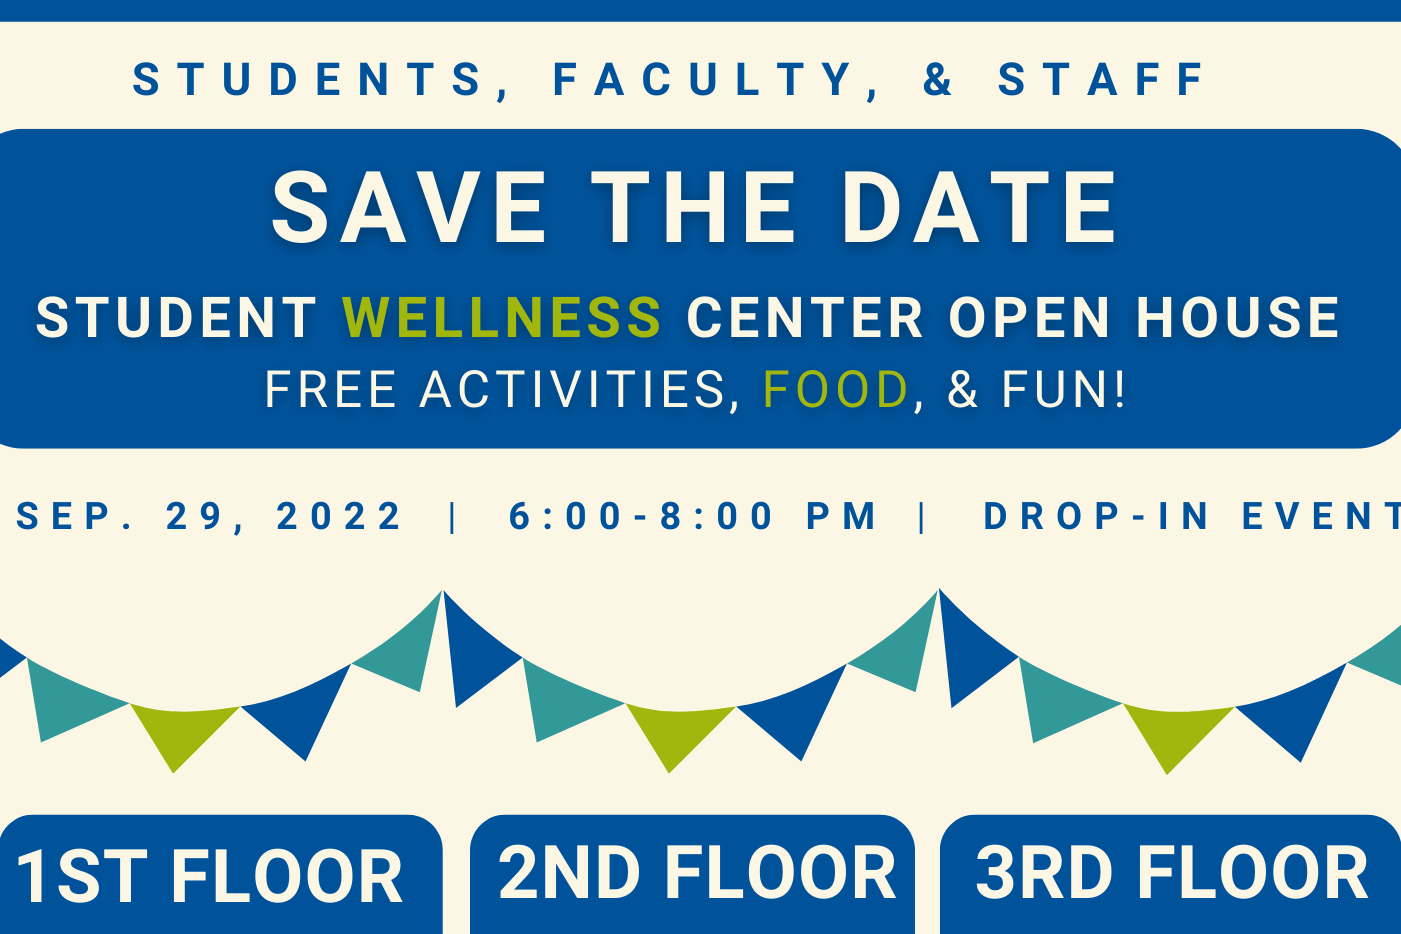 THE DATE STUDENT WELLNESS CENTER OPEN HOUSE FREE ACTIVITIES, FOOD, & FUN! SEP. 29, 2022 Blue, green, and white font: STUDENTS, FACULTY, & STAFF SAVE 6:00-8:00 PM DROP-IN-EVENT